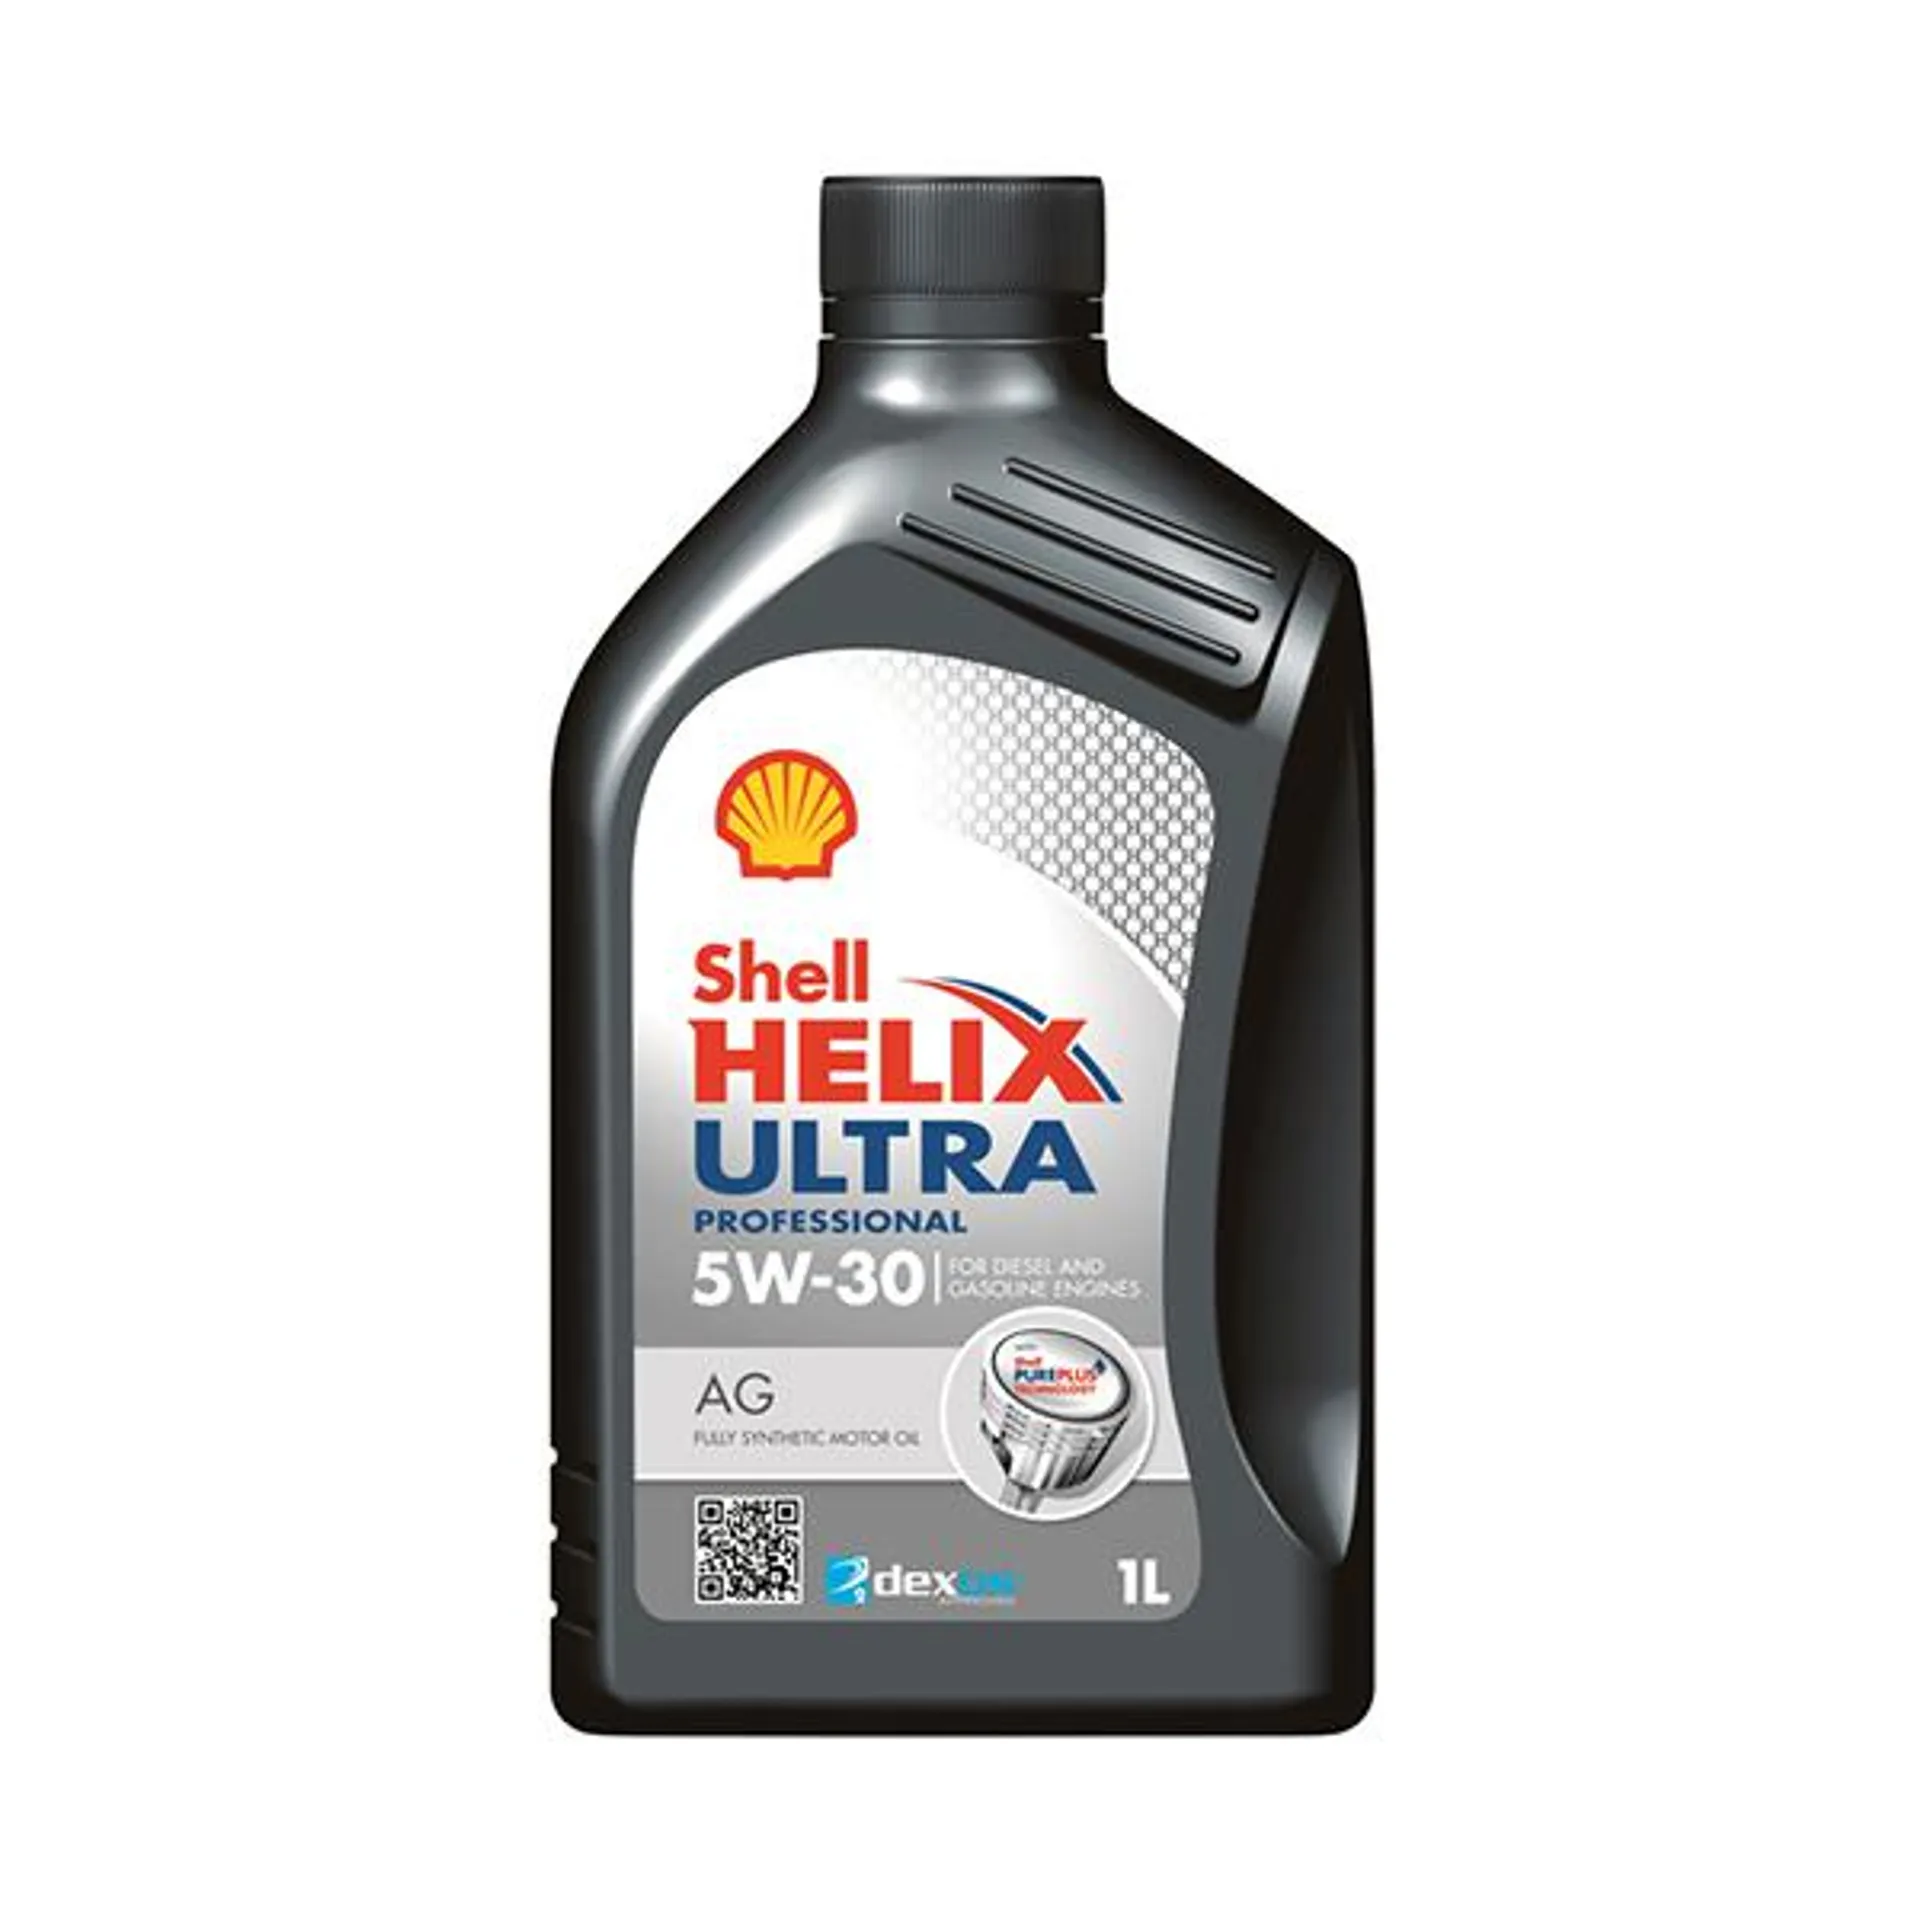 Shell Helix Ultra Professional AG Engine Oil - 5W-30 - 1Ltr